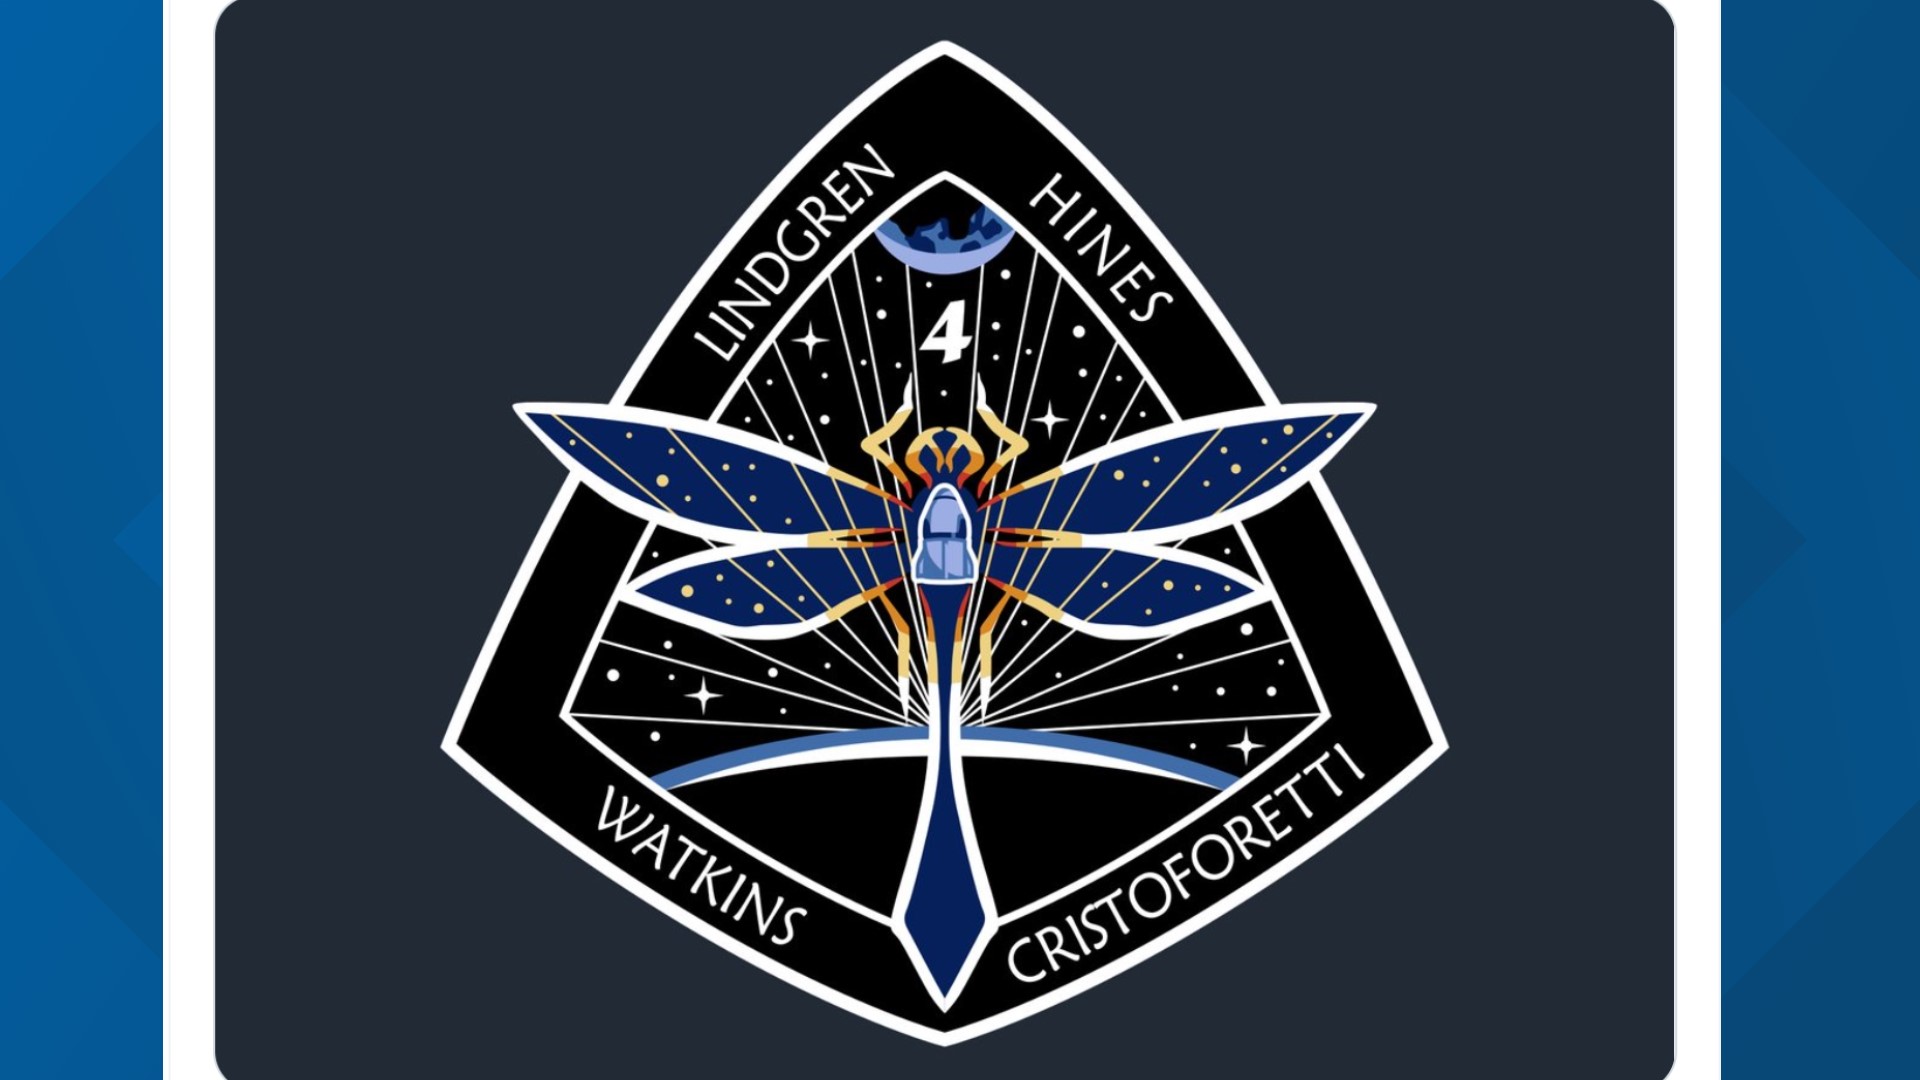 Texas A&M student designs mission patch for NASA SpaceX Crew4